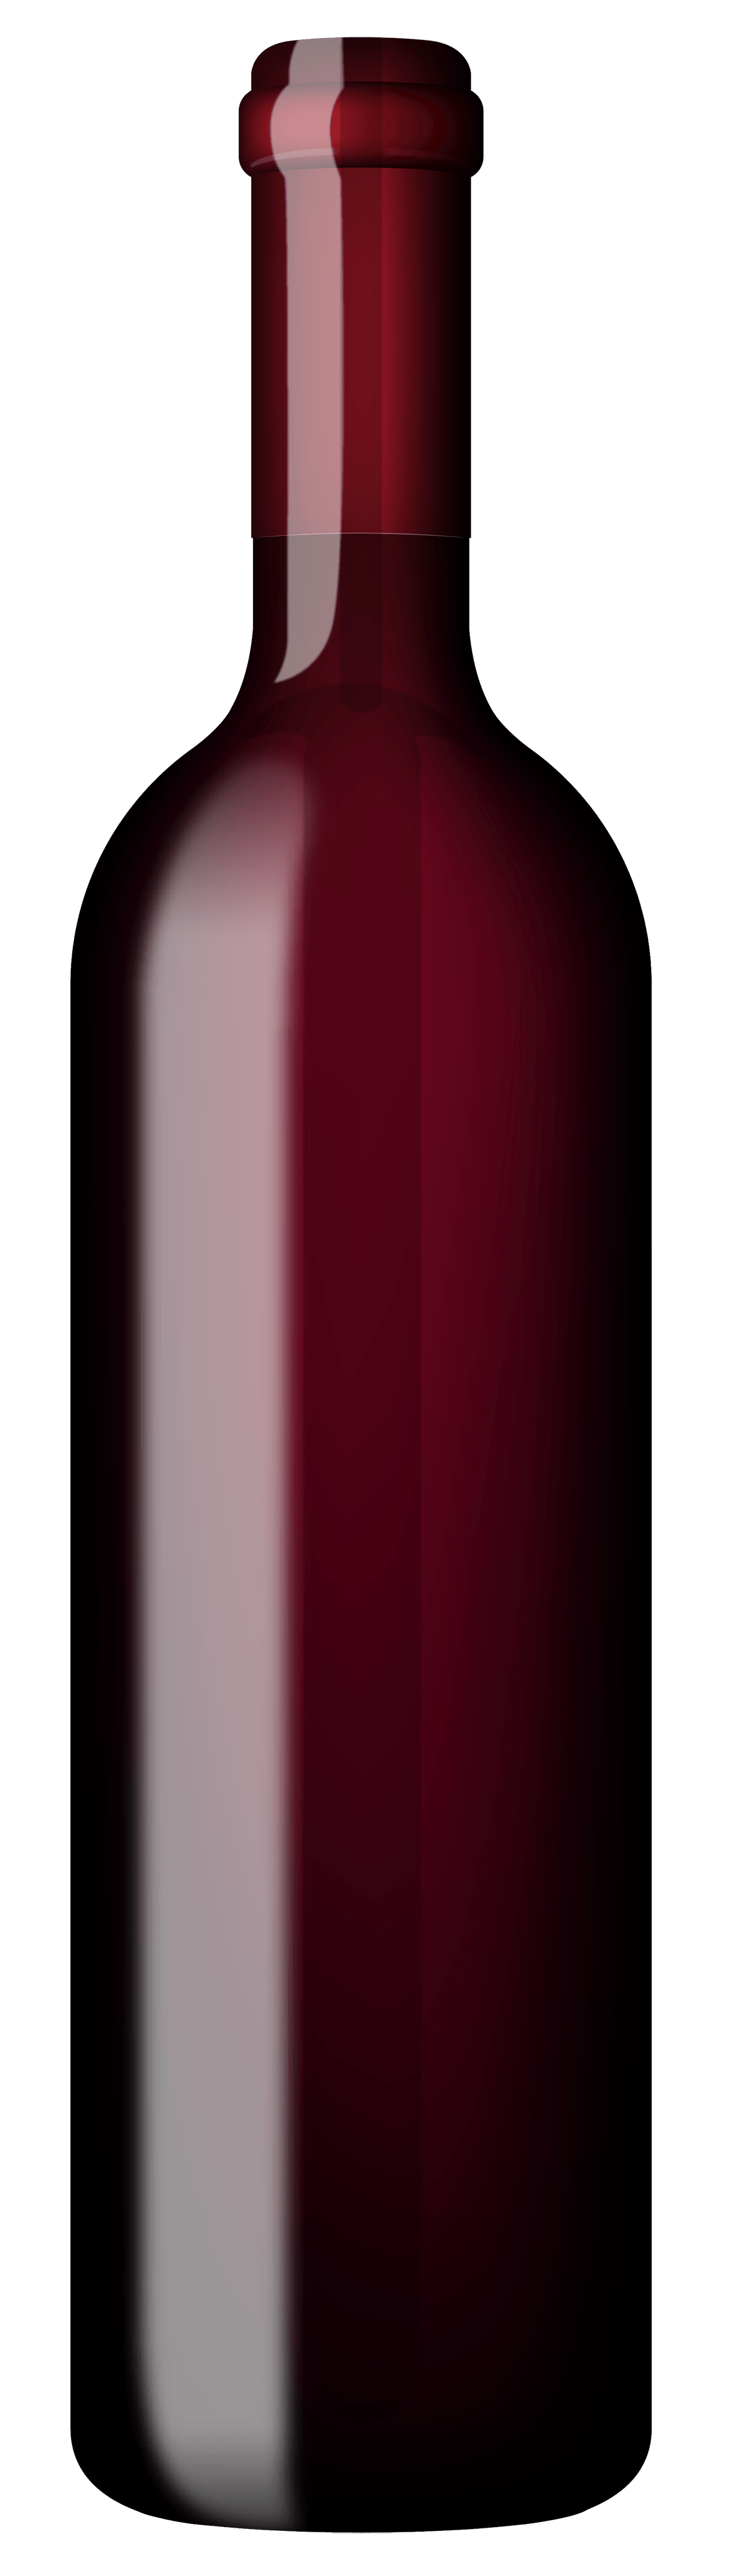 Red wine clipart 4